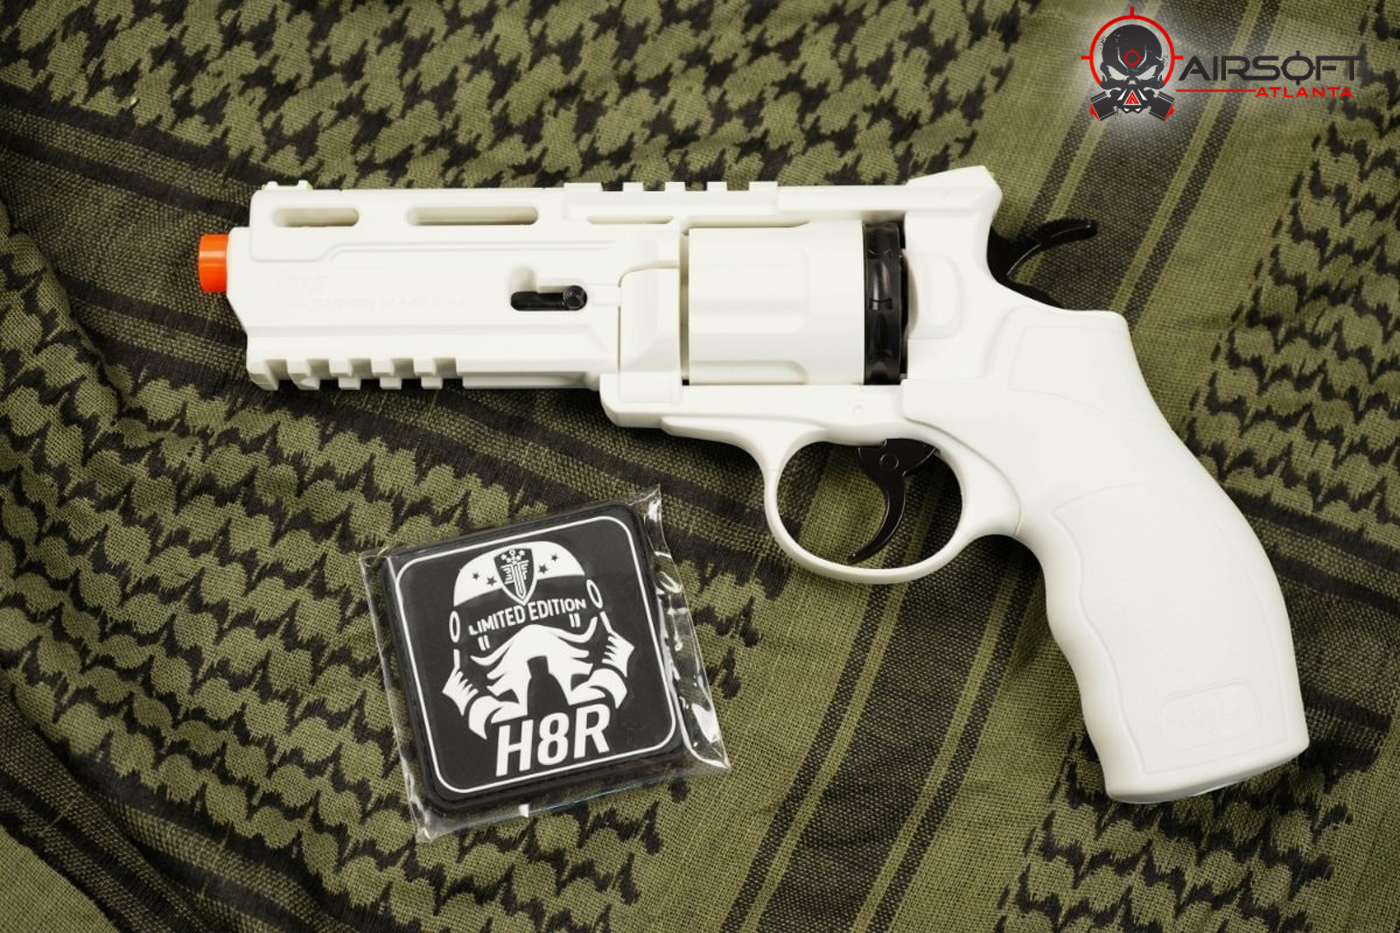 Airsoft Atlanta: Limited Edition Elite Force H8R